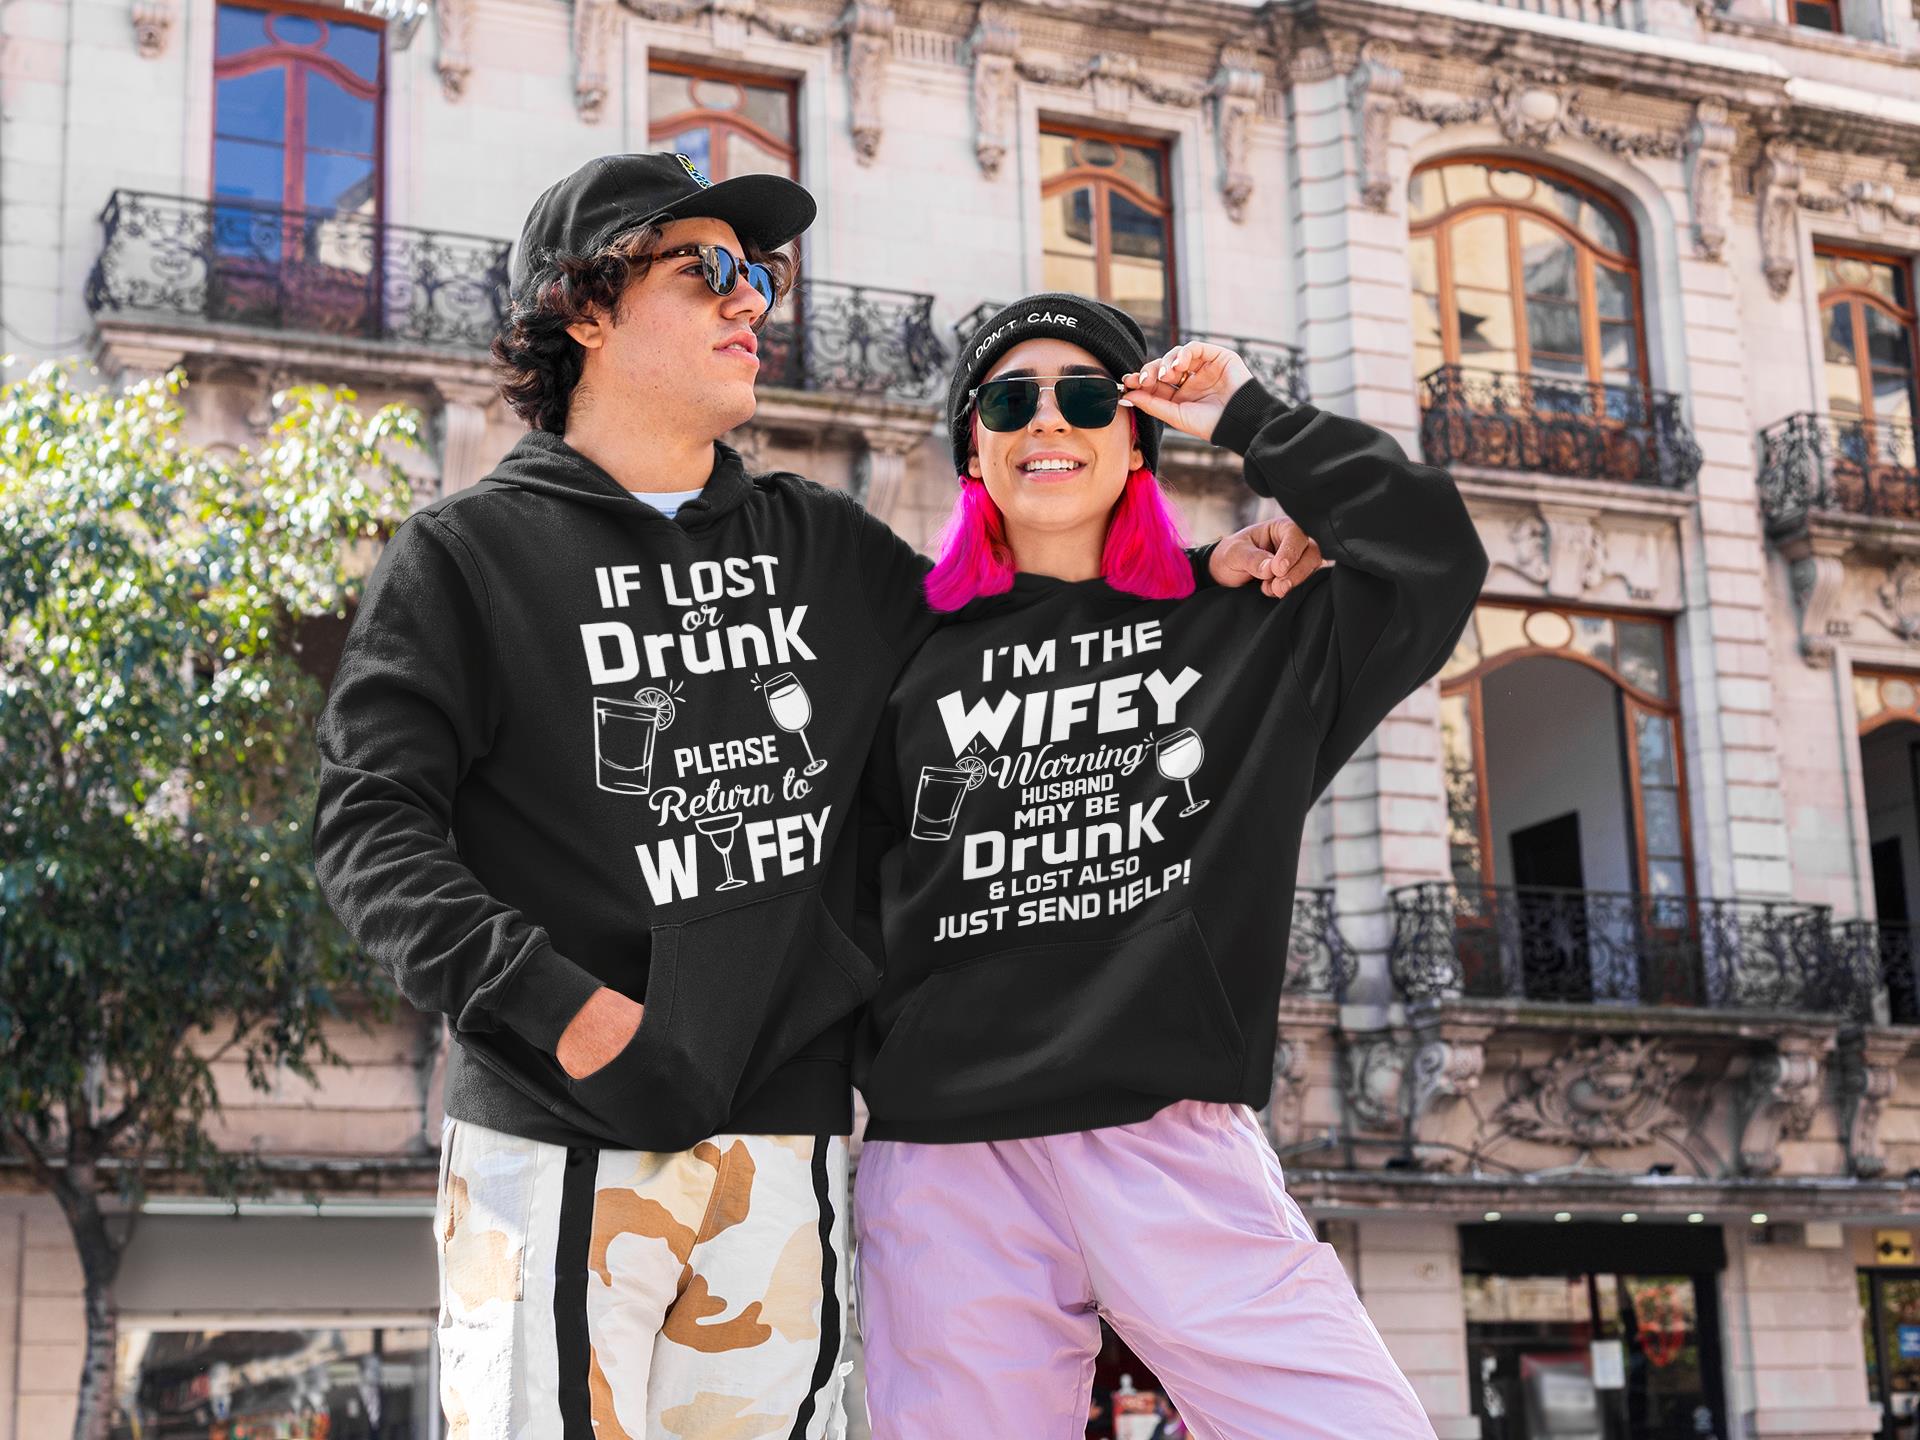 If Lost Or Drunk Please Return To Wifey Matching For Husband And Wife Hoodies